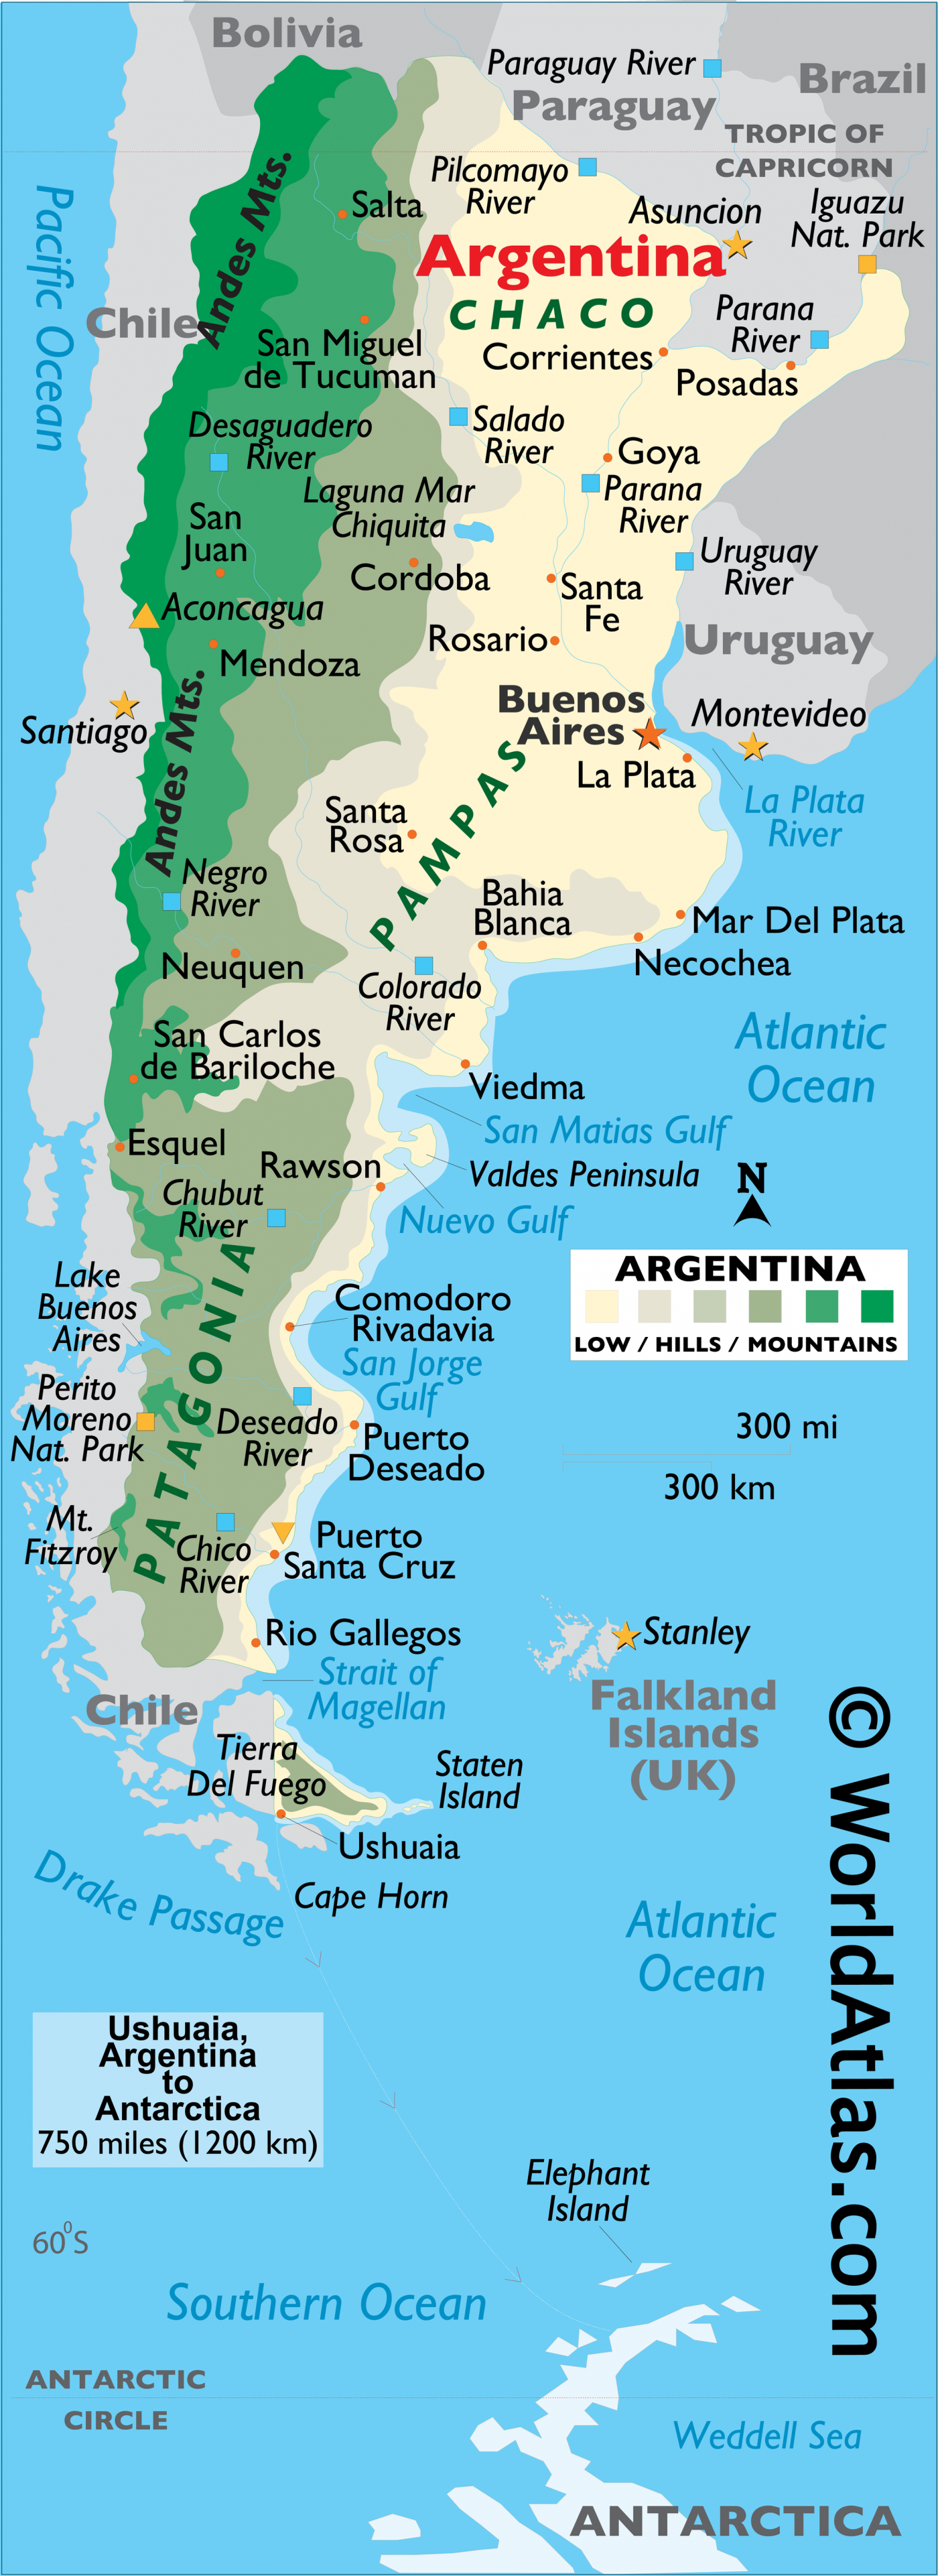 A map of Argentina, showing the different regions of the country